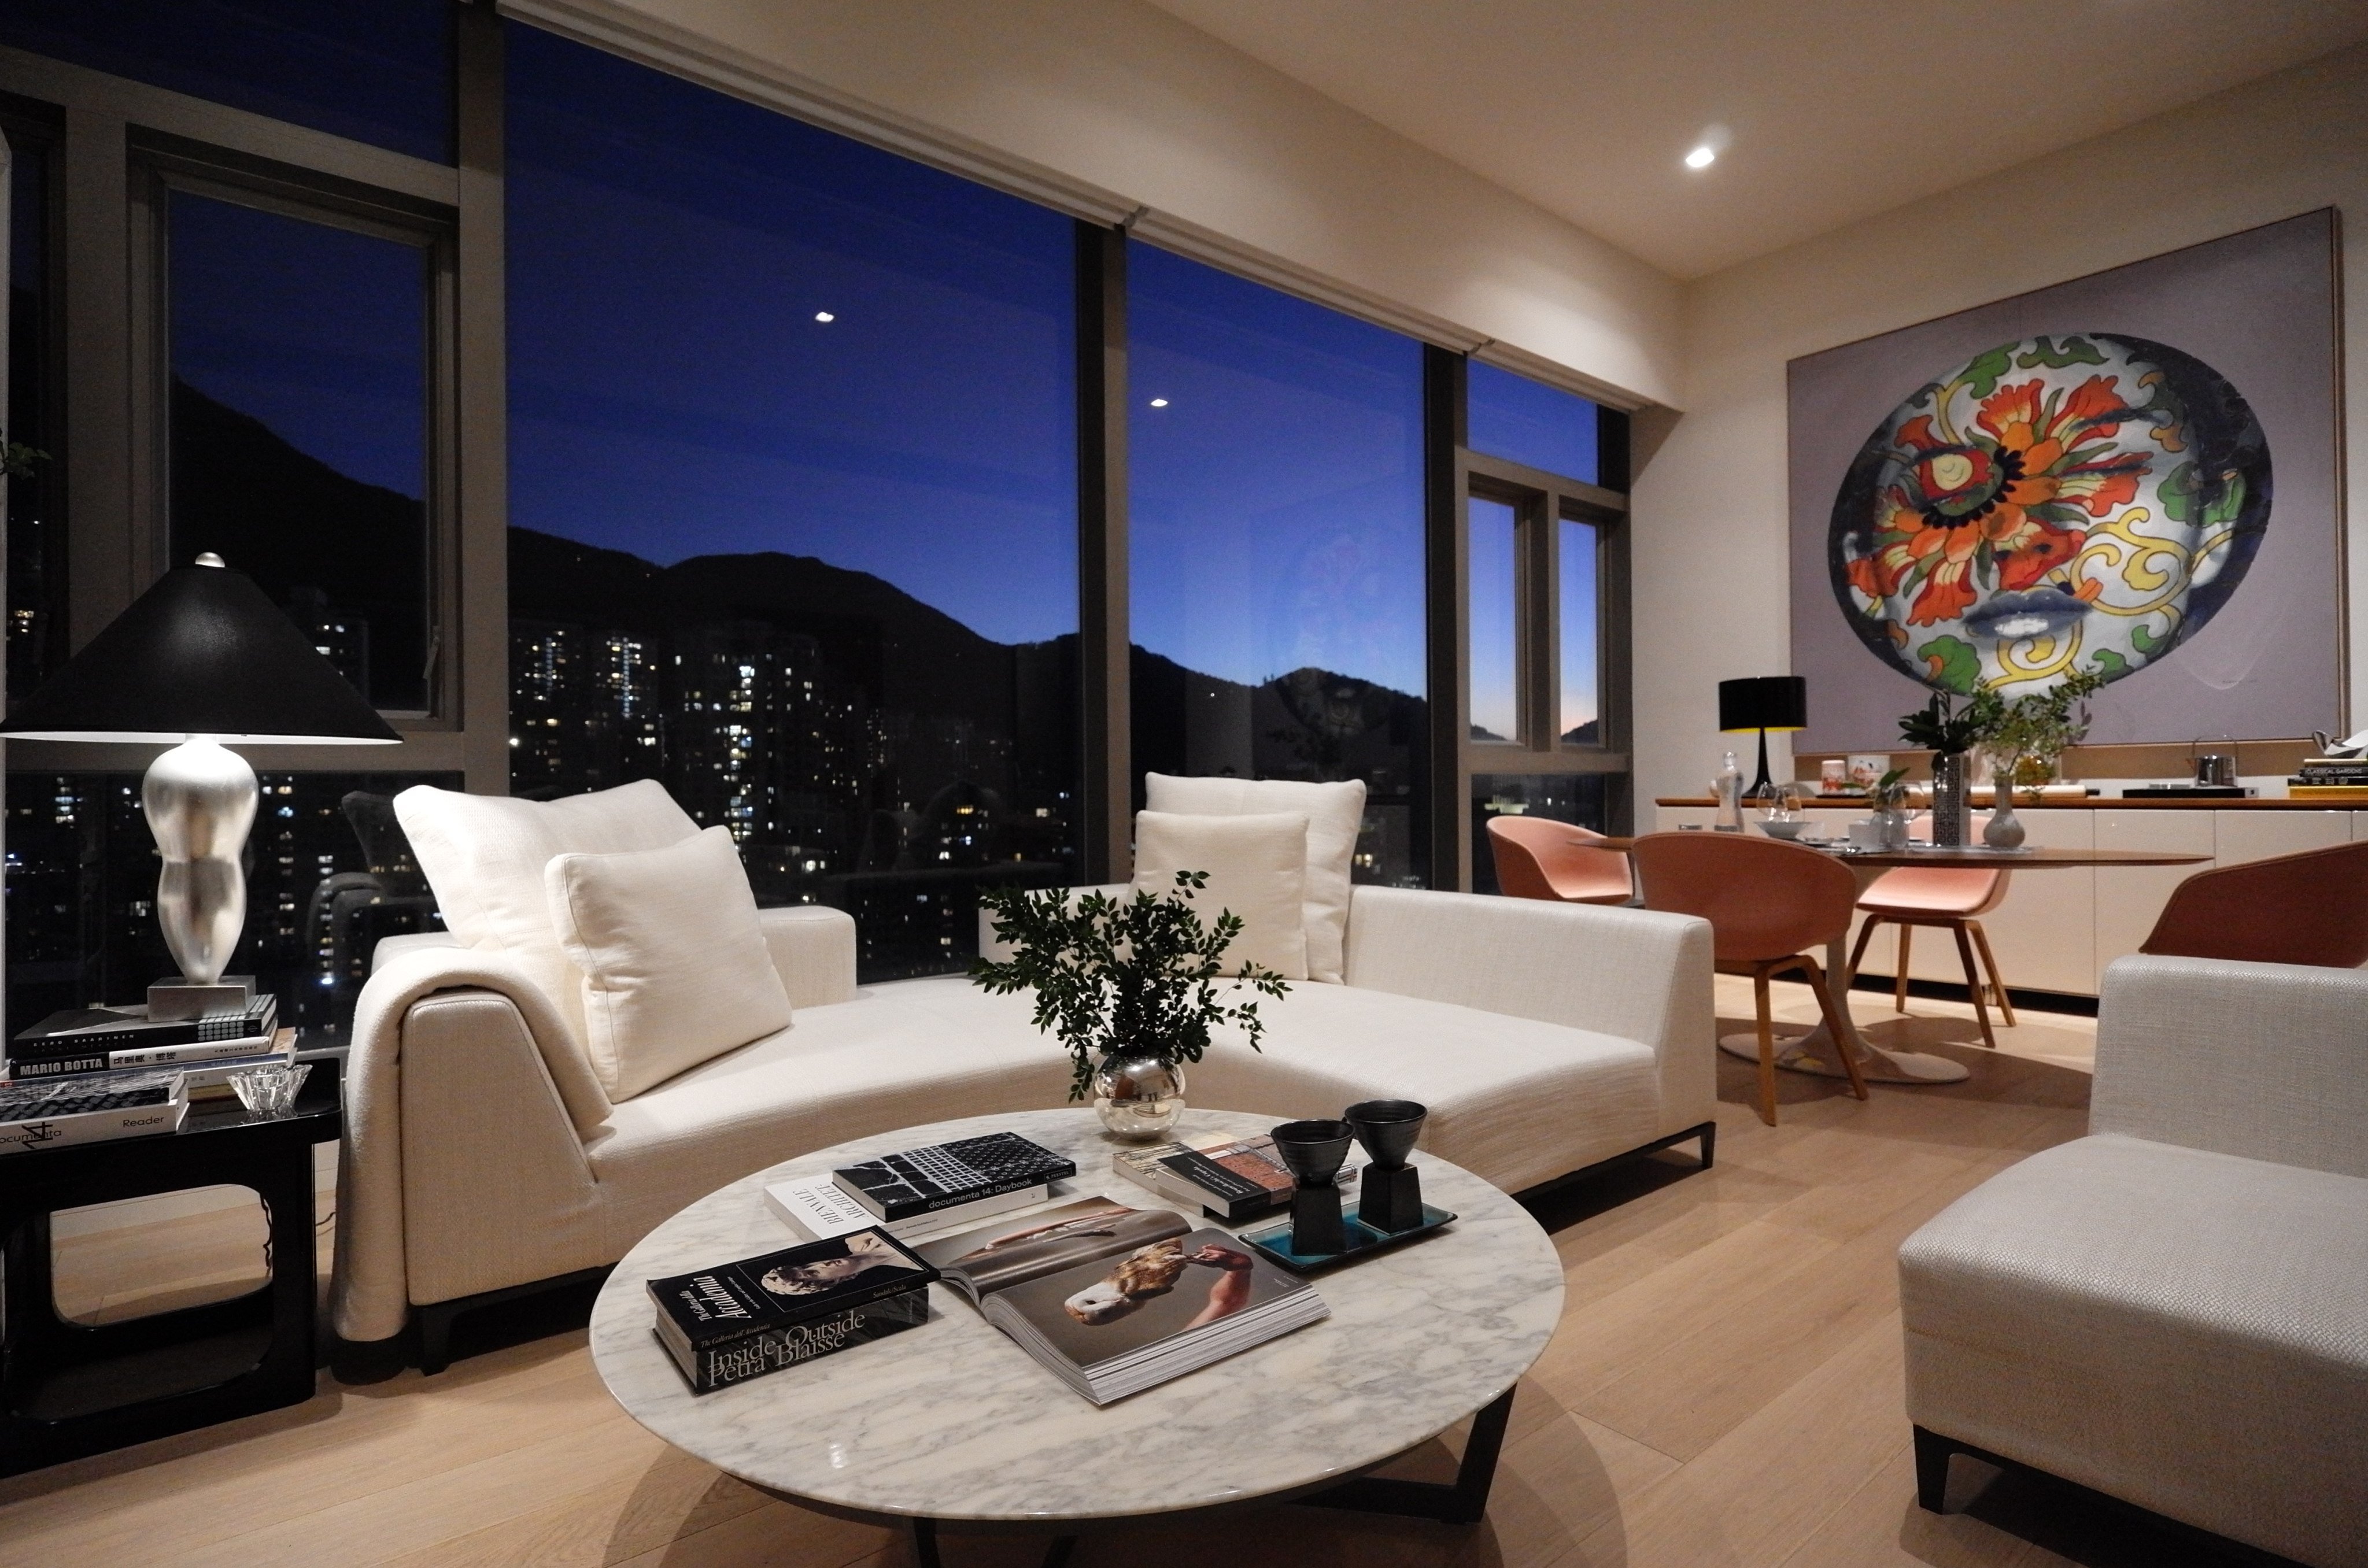 The penthouse apartment in Sai Ying Pun, Hong Kong, after its Italian luxury makeover by Susan Chiow, a newly qualified interior designer who rents the 1,300 sq ft property with her architect husband, Silas. Photo: Silas Chiow